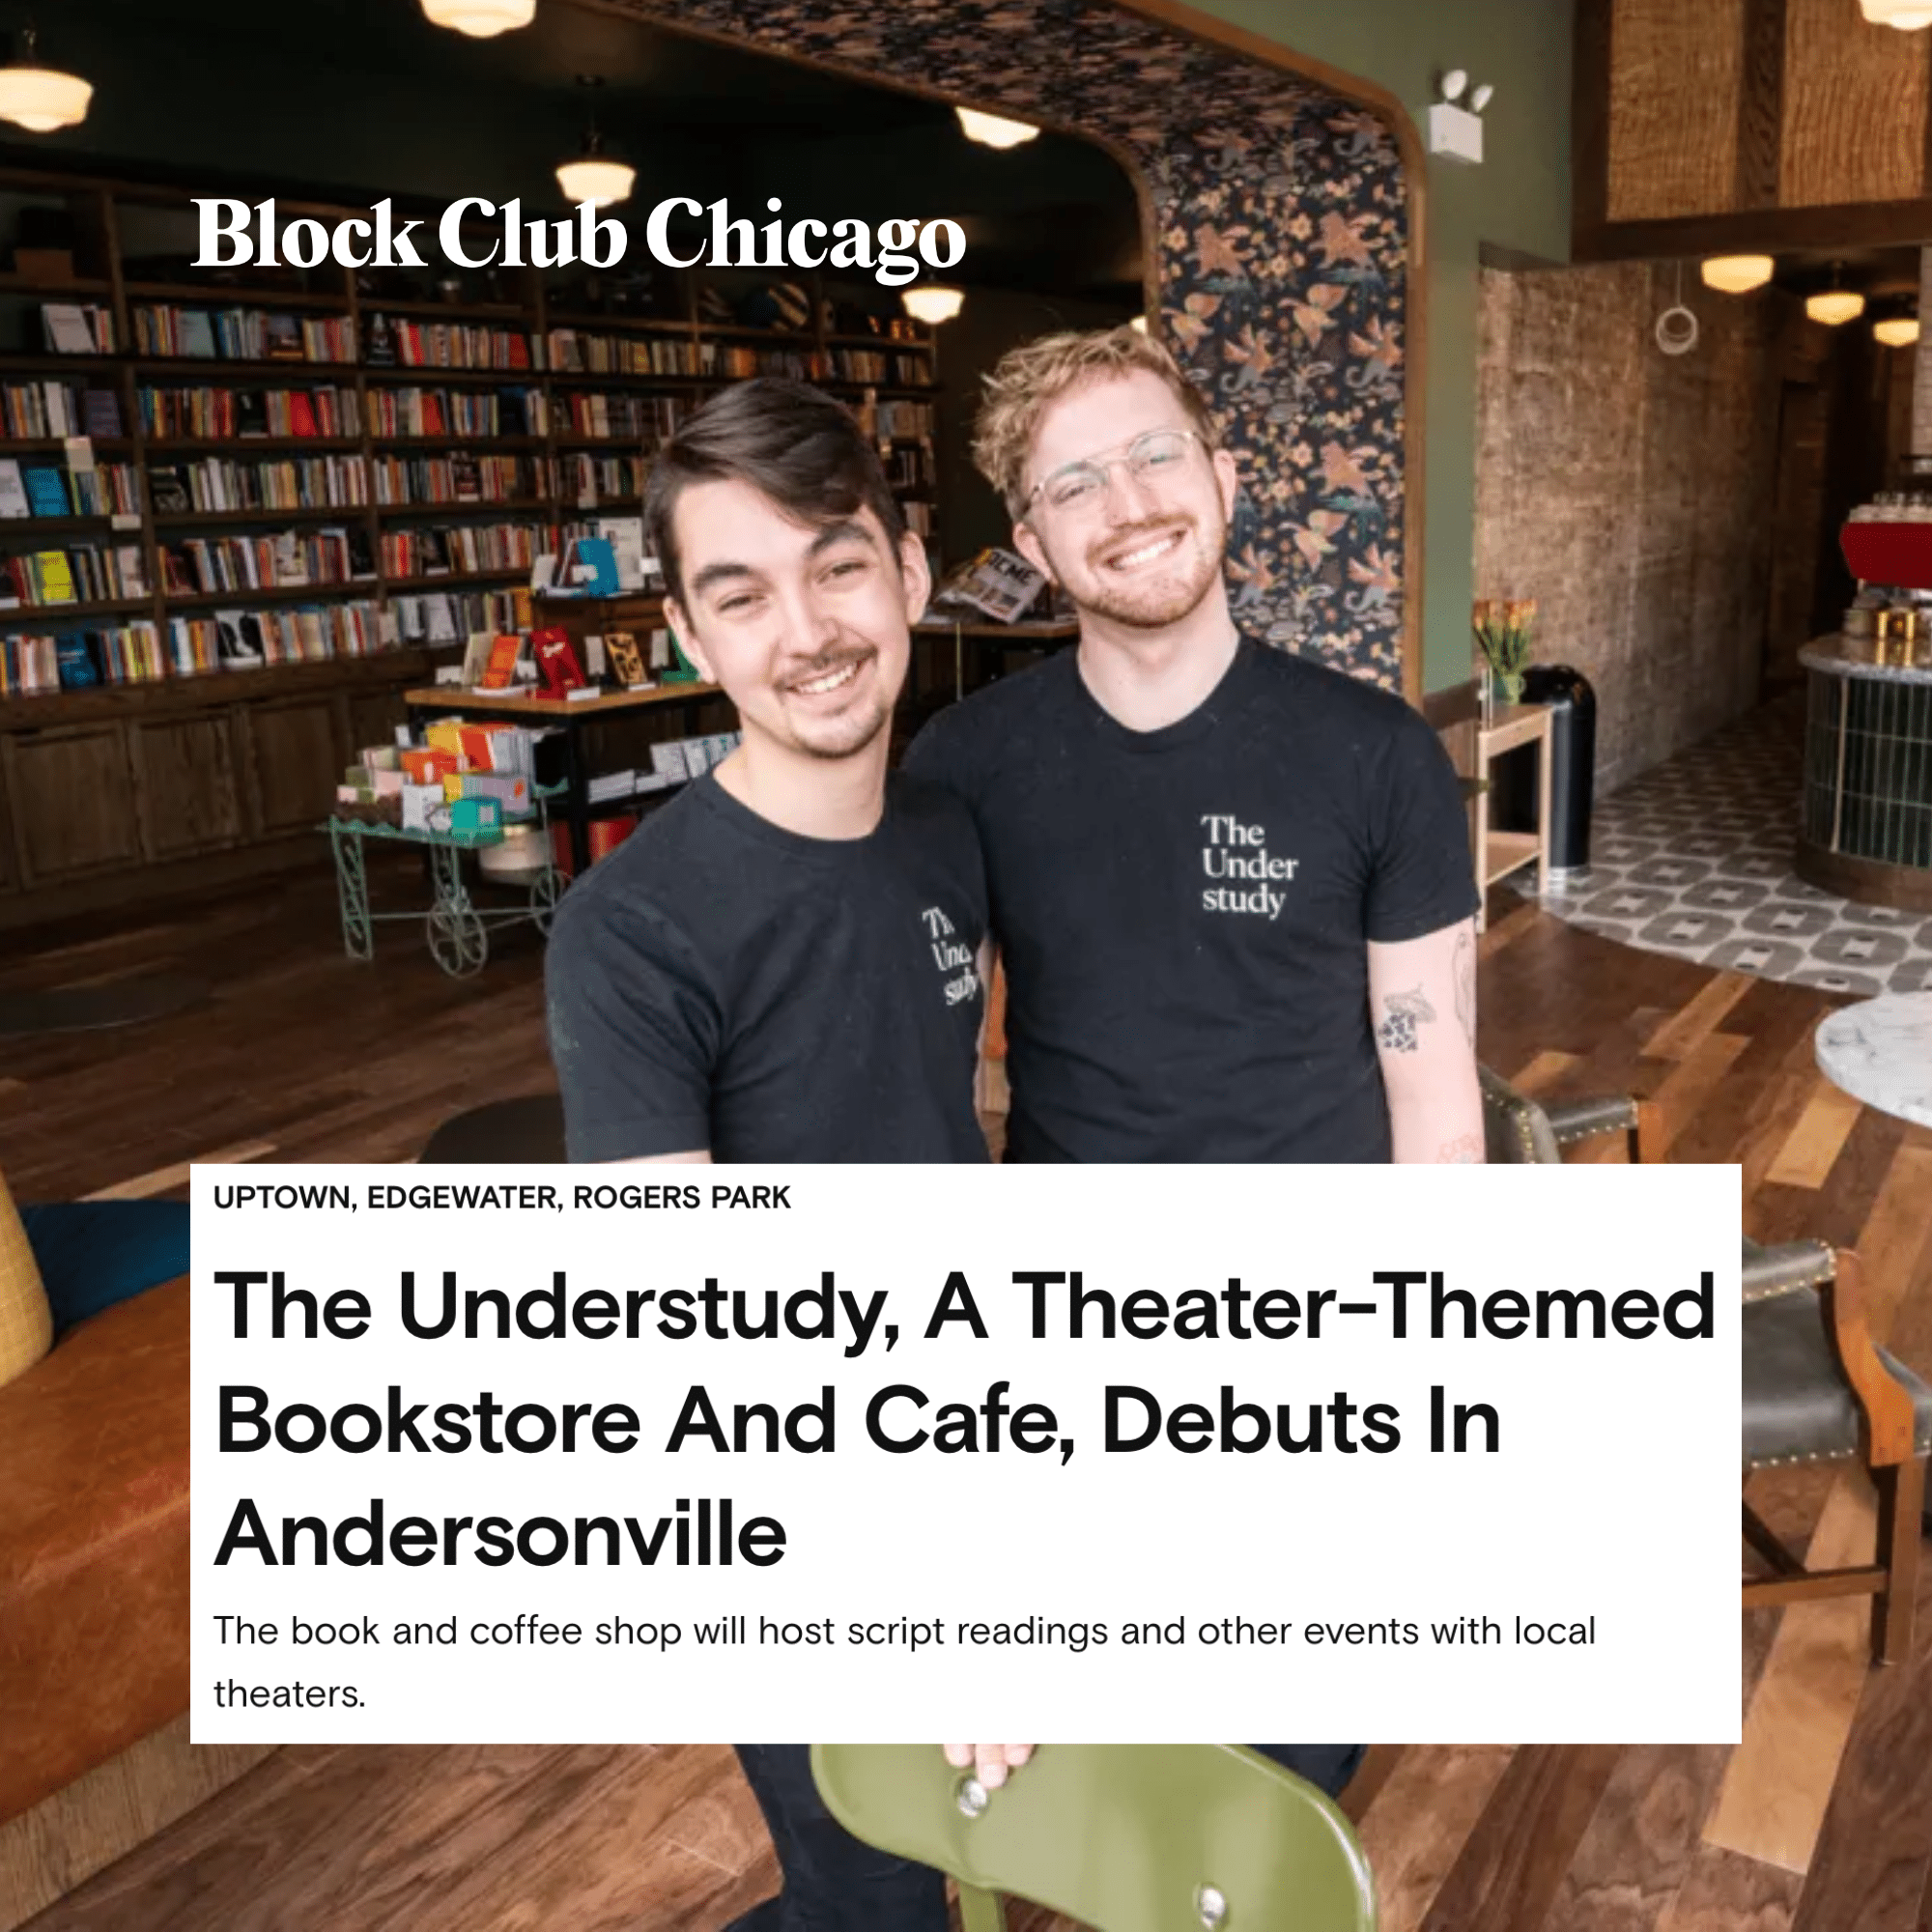 The Understudy, A Theater-Themed Bookstore And Cafe, Debuts In Andersonville